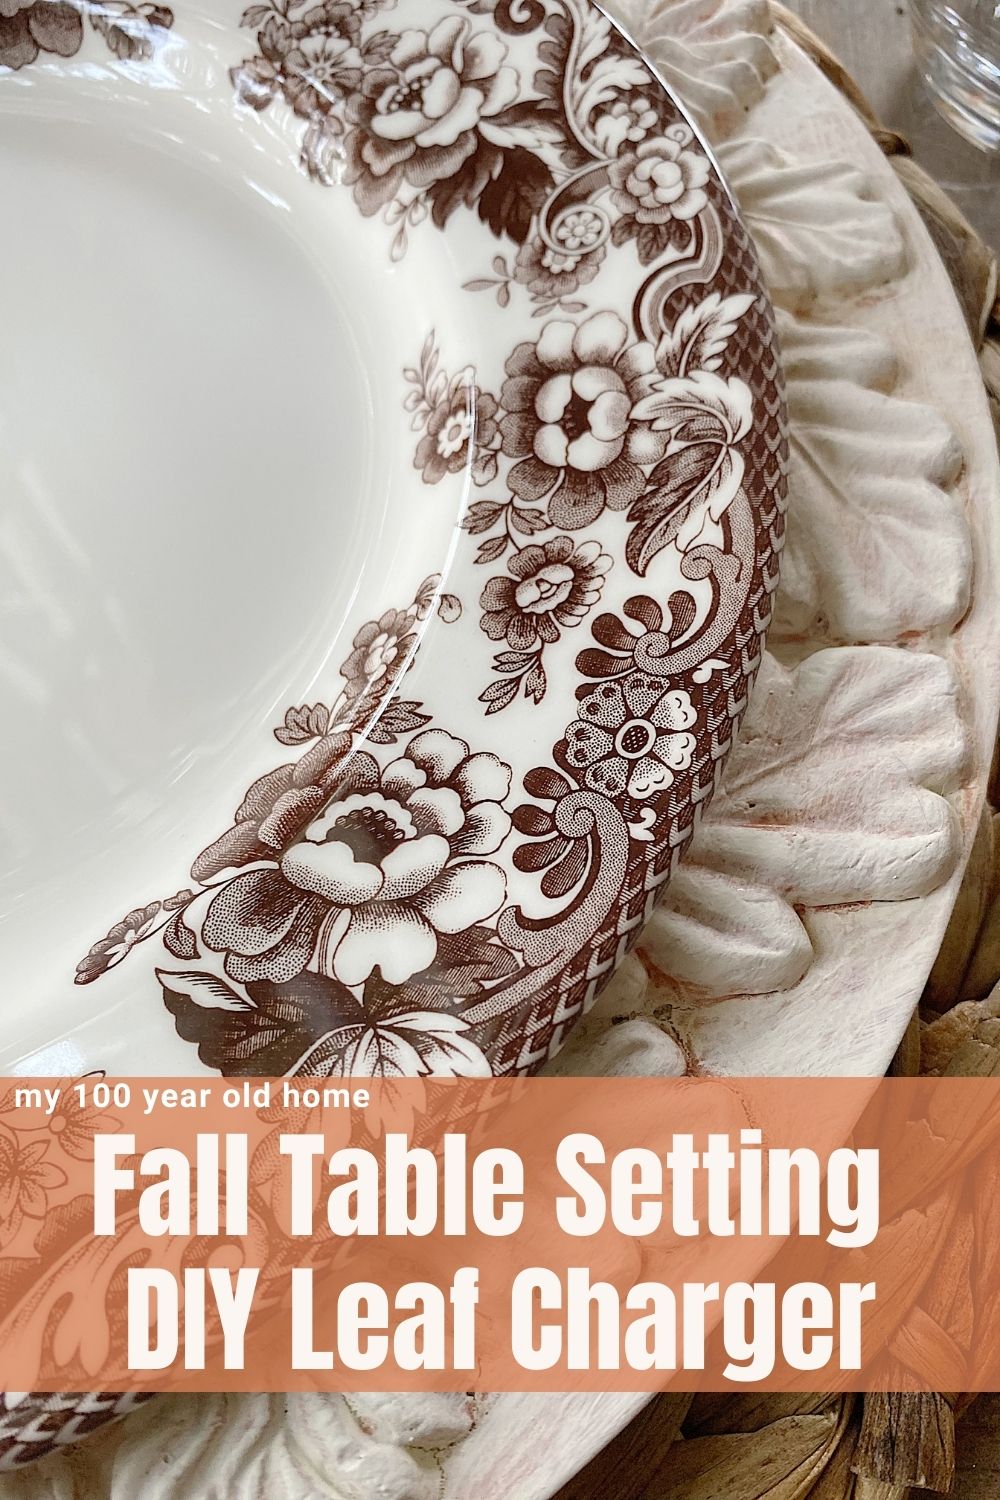 I am obsessed with Iron Orchid Designs and all of their products. Look at these amazing Fall Table Setting DIY leaf chargers I made!